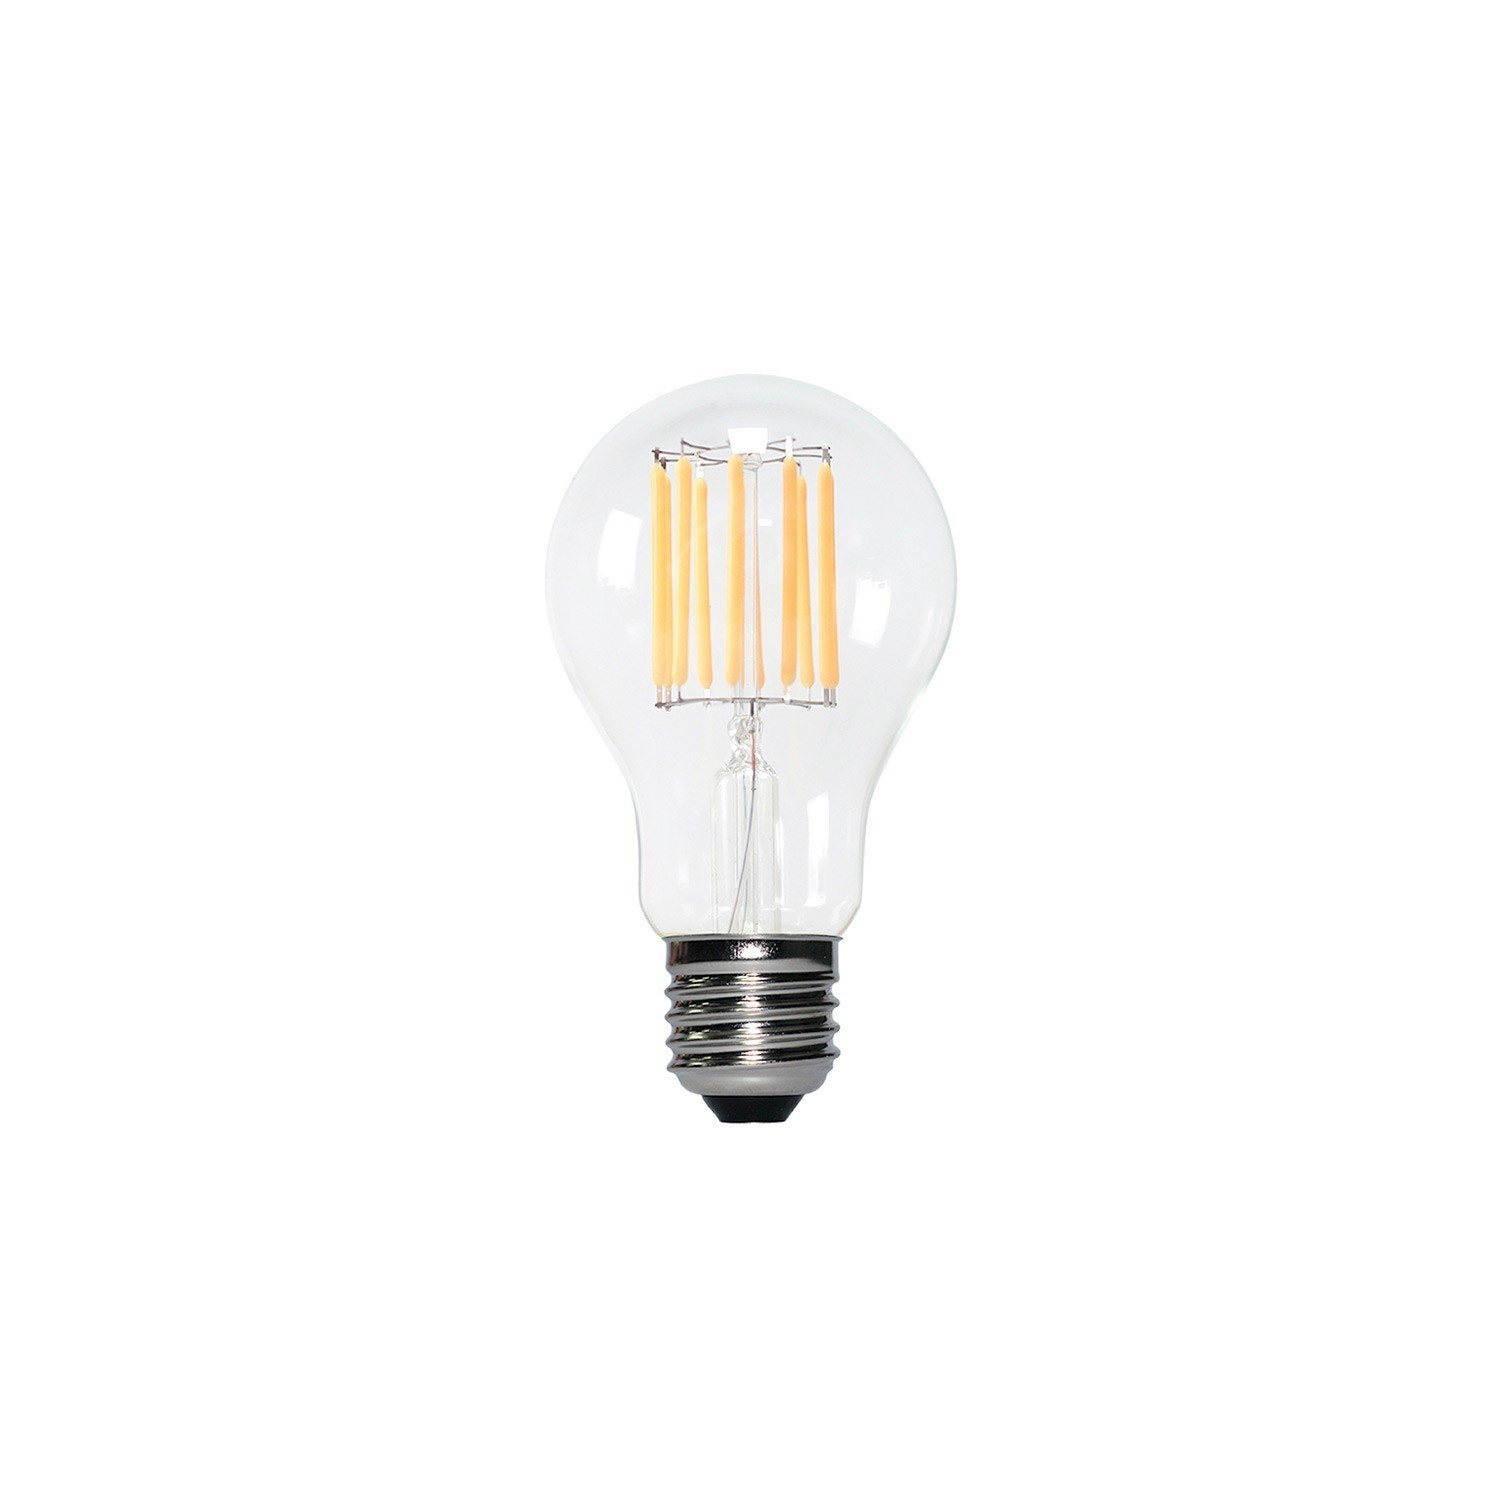 LED Light Bulb Clear B02 5V Collection Vertical filament Drop A60 1,3W 110Lm E27 2500K Dimmable